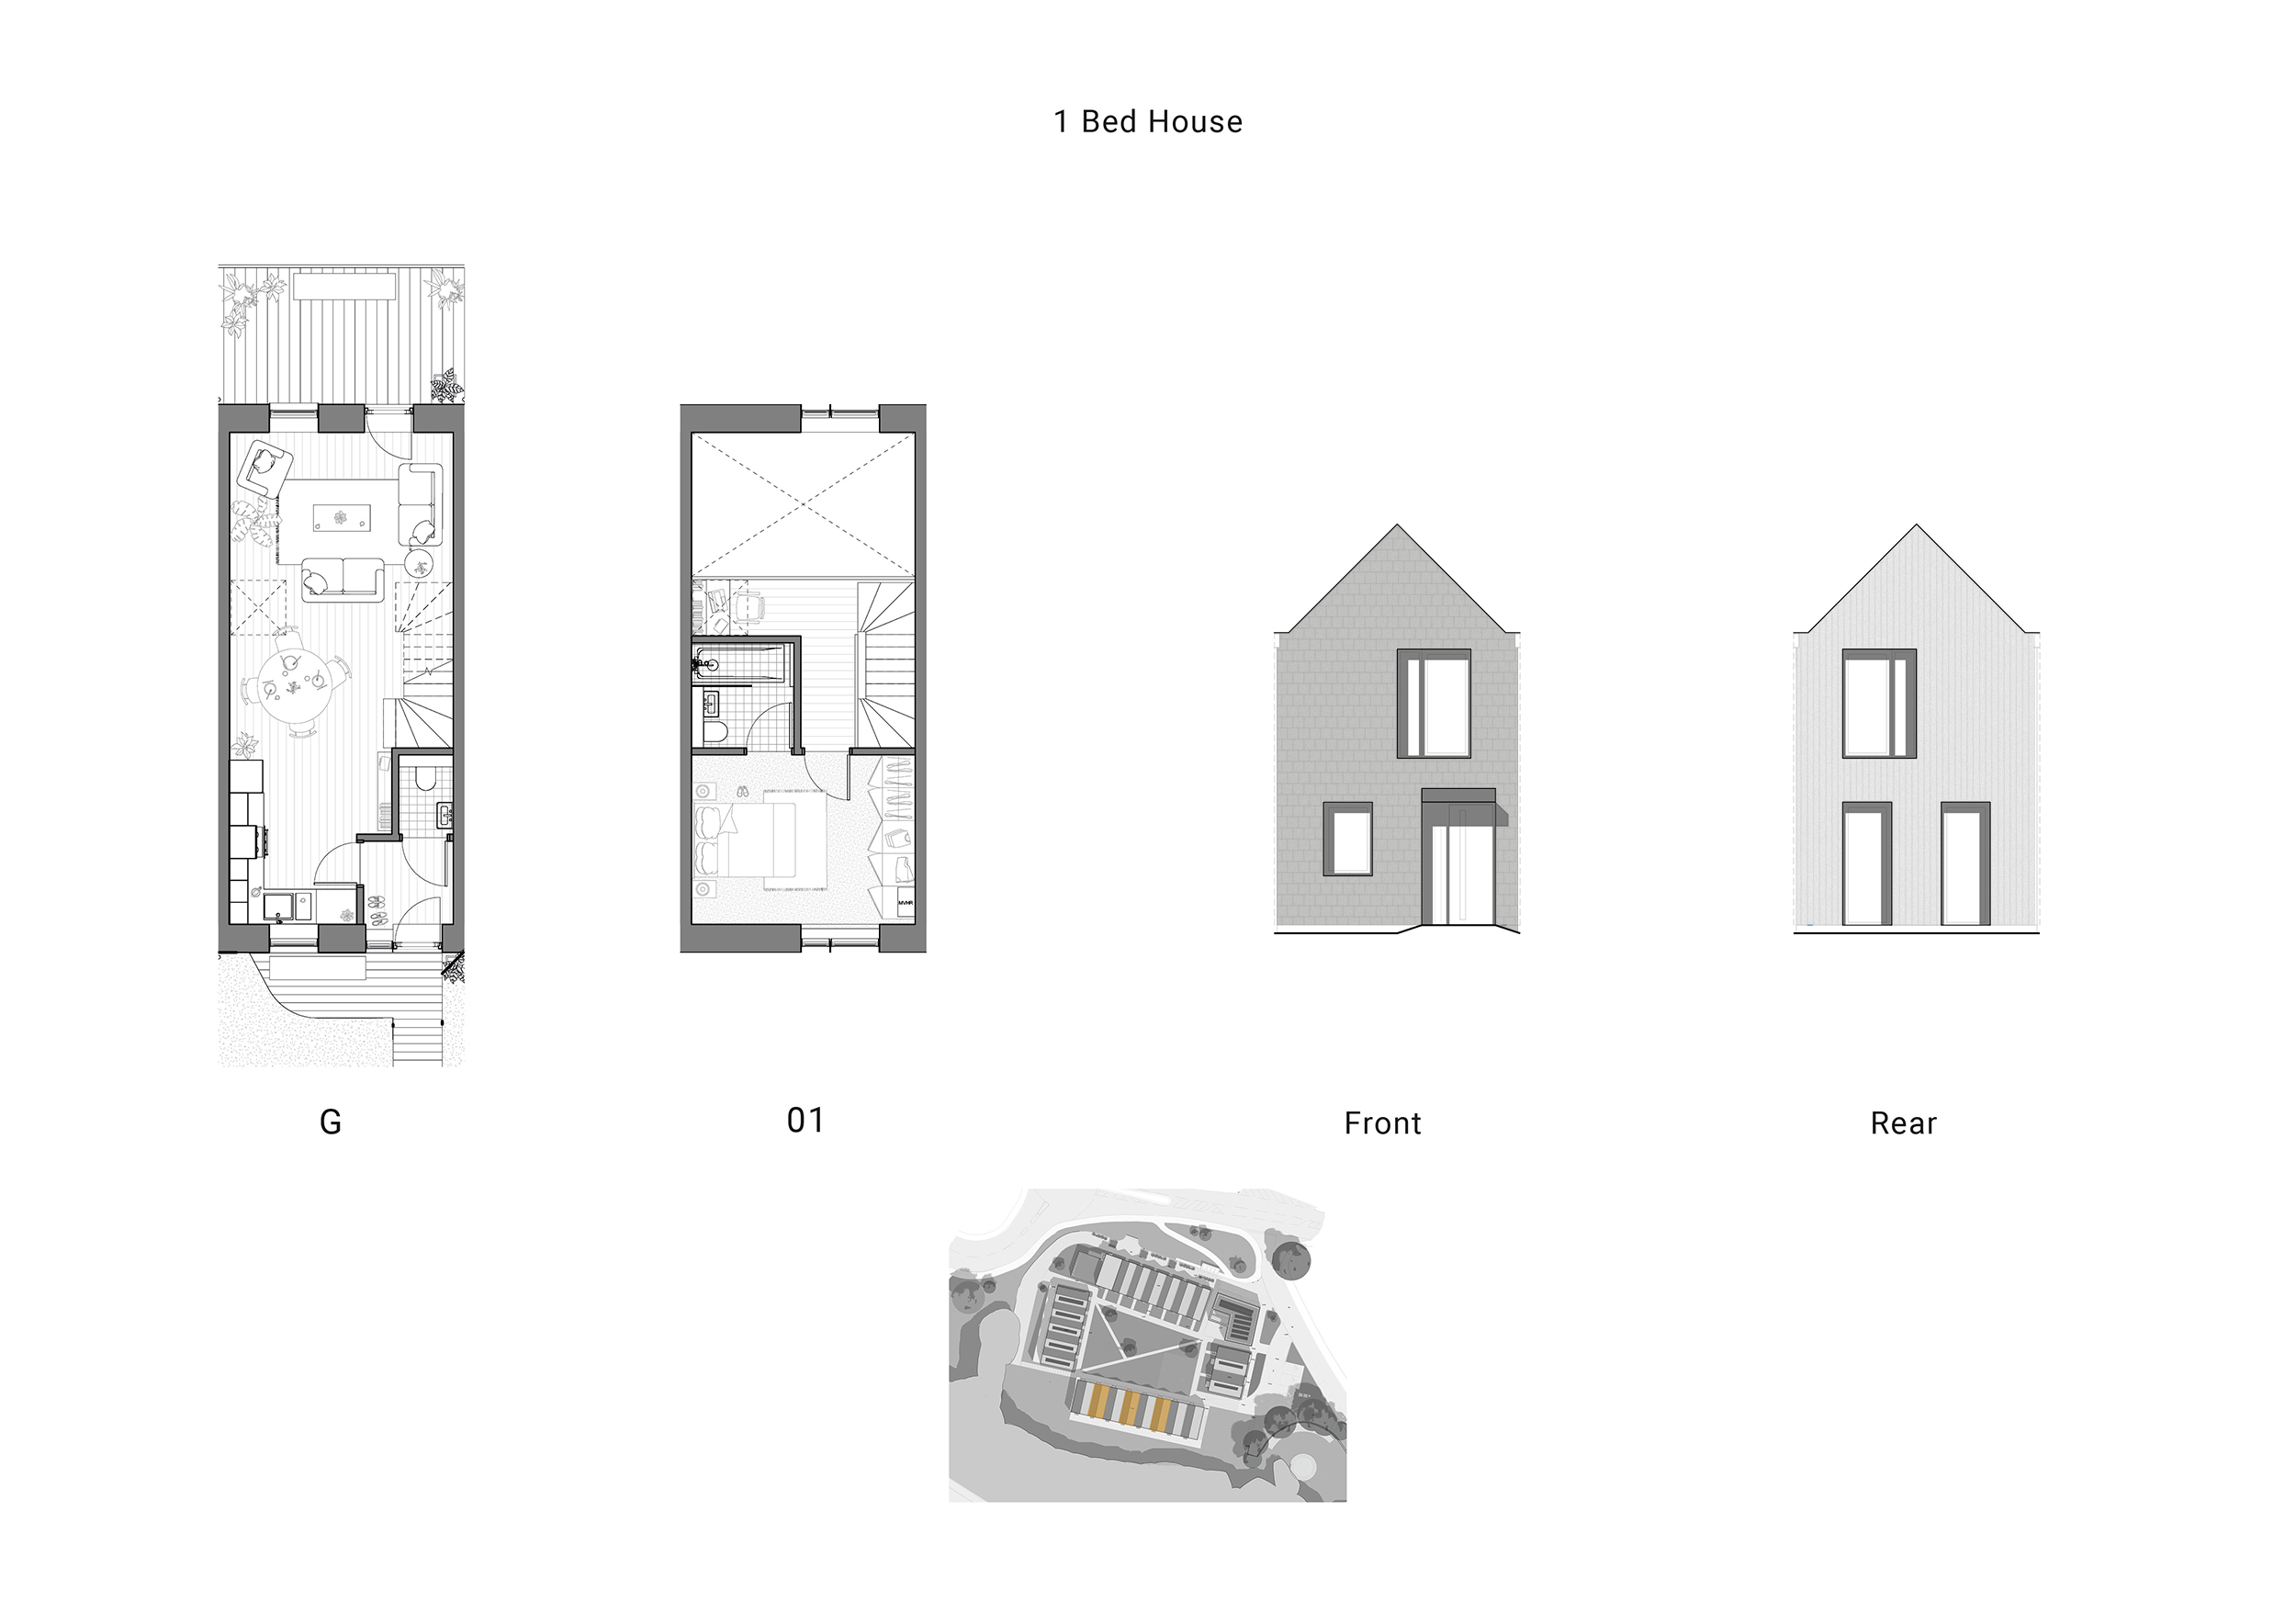 1 Bed House Plans and Elevations 